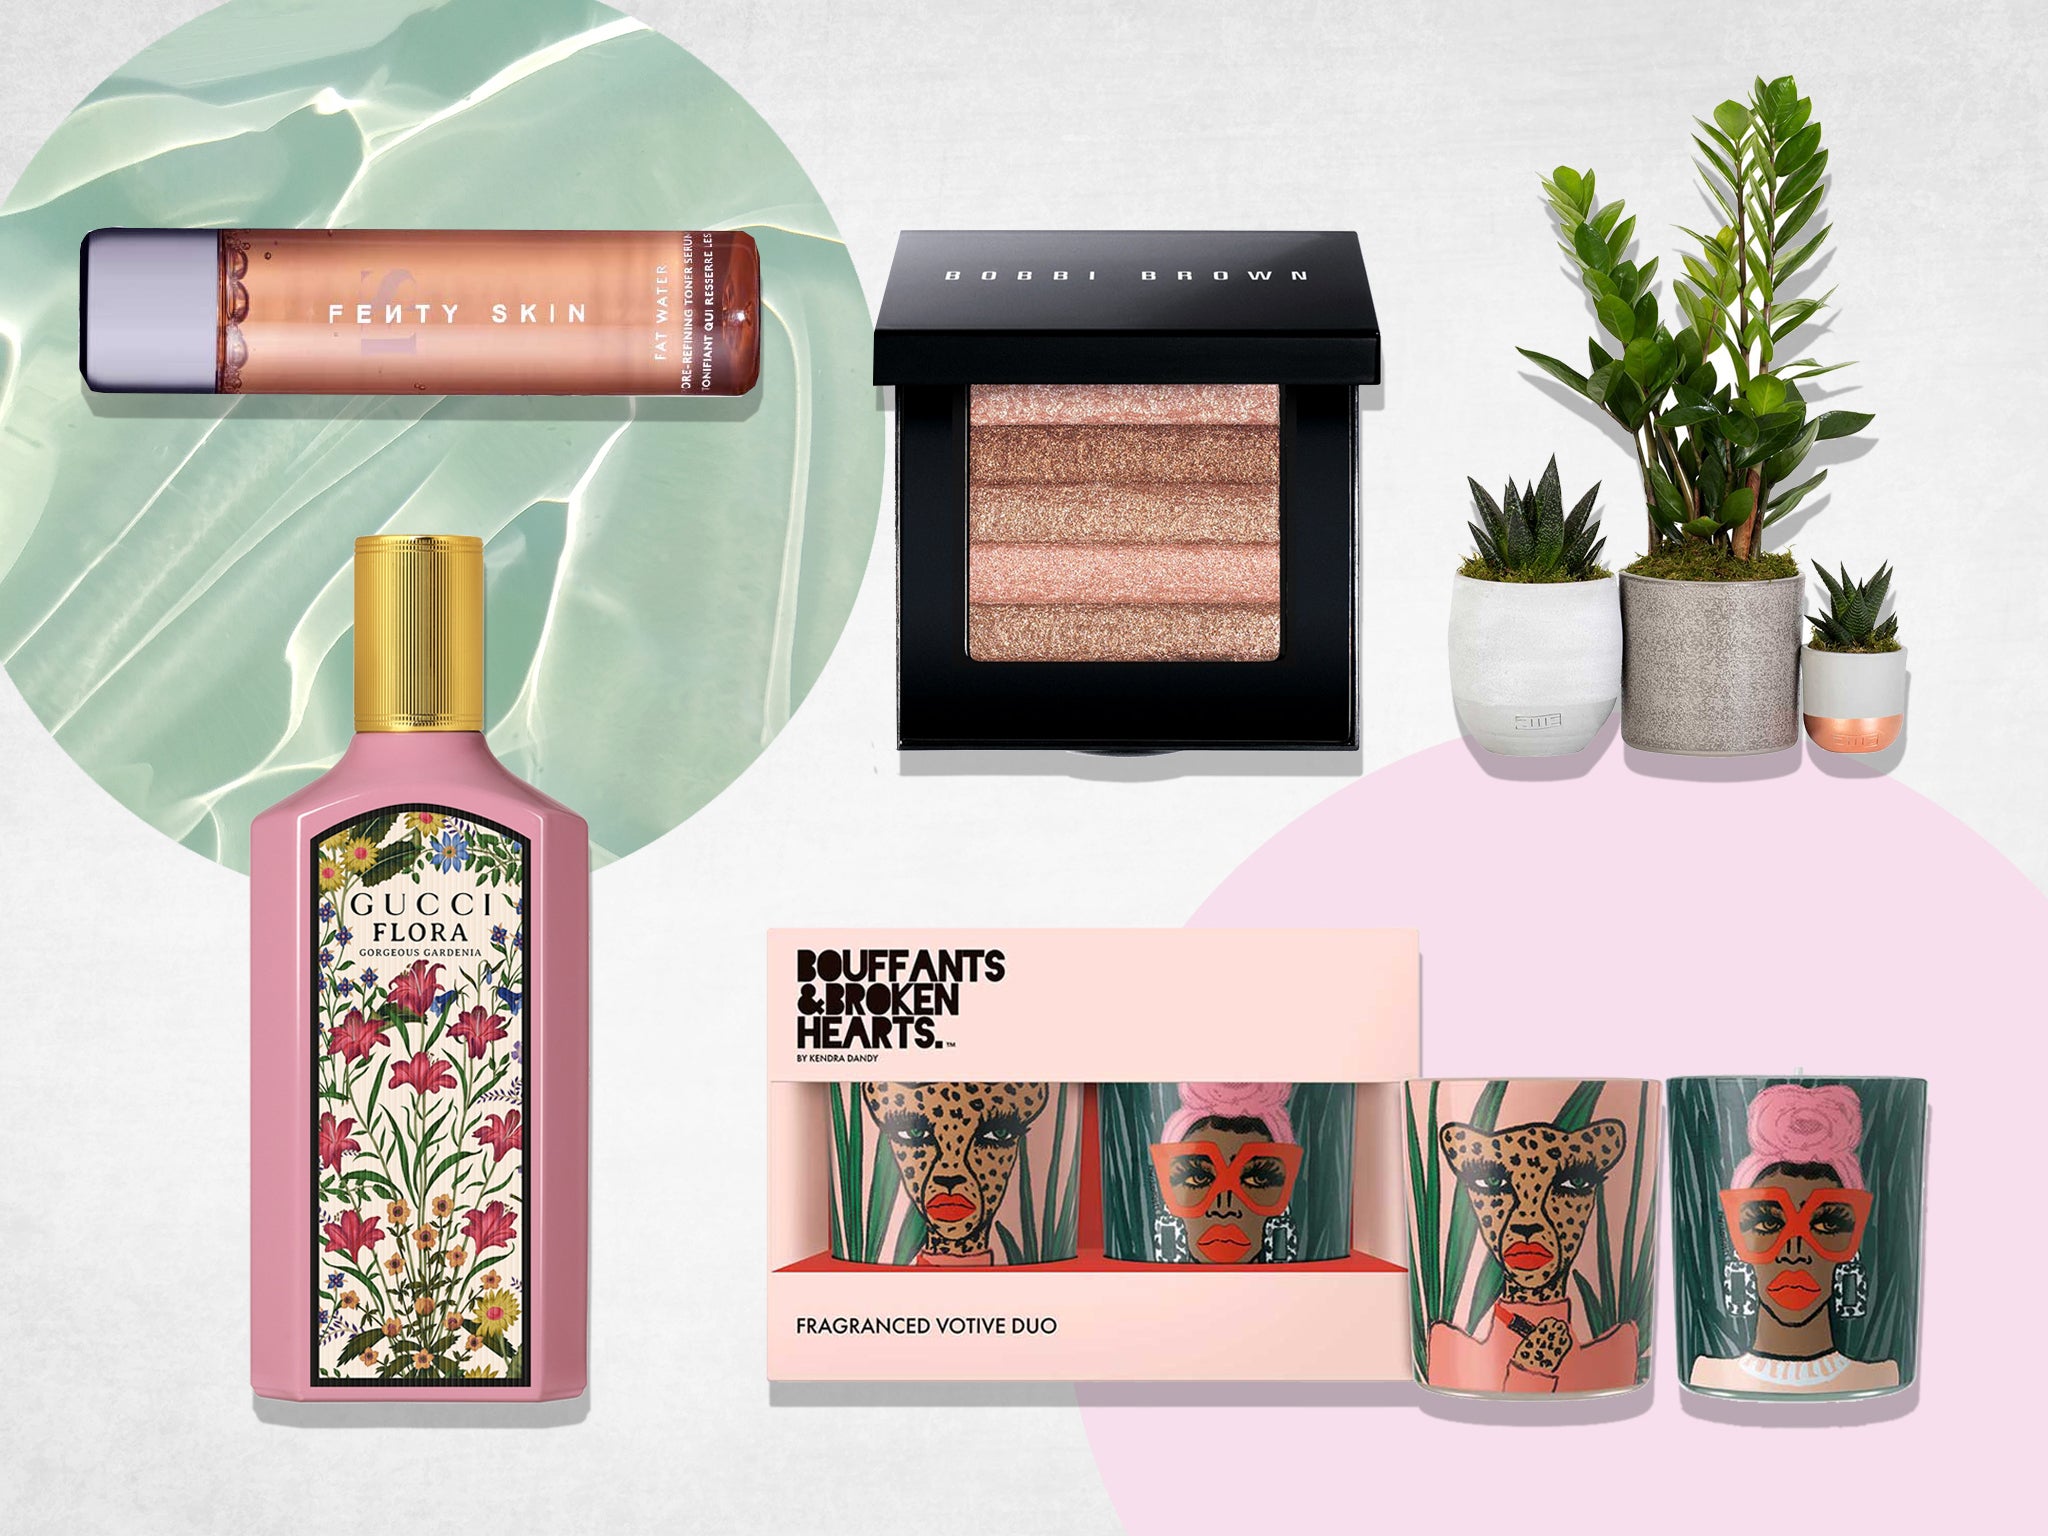 From skincare and stationery to candles and plants, there’s something for every taste